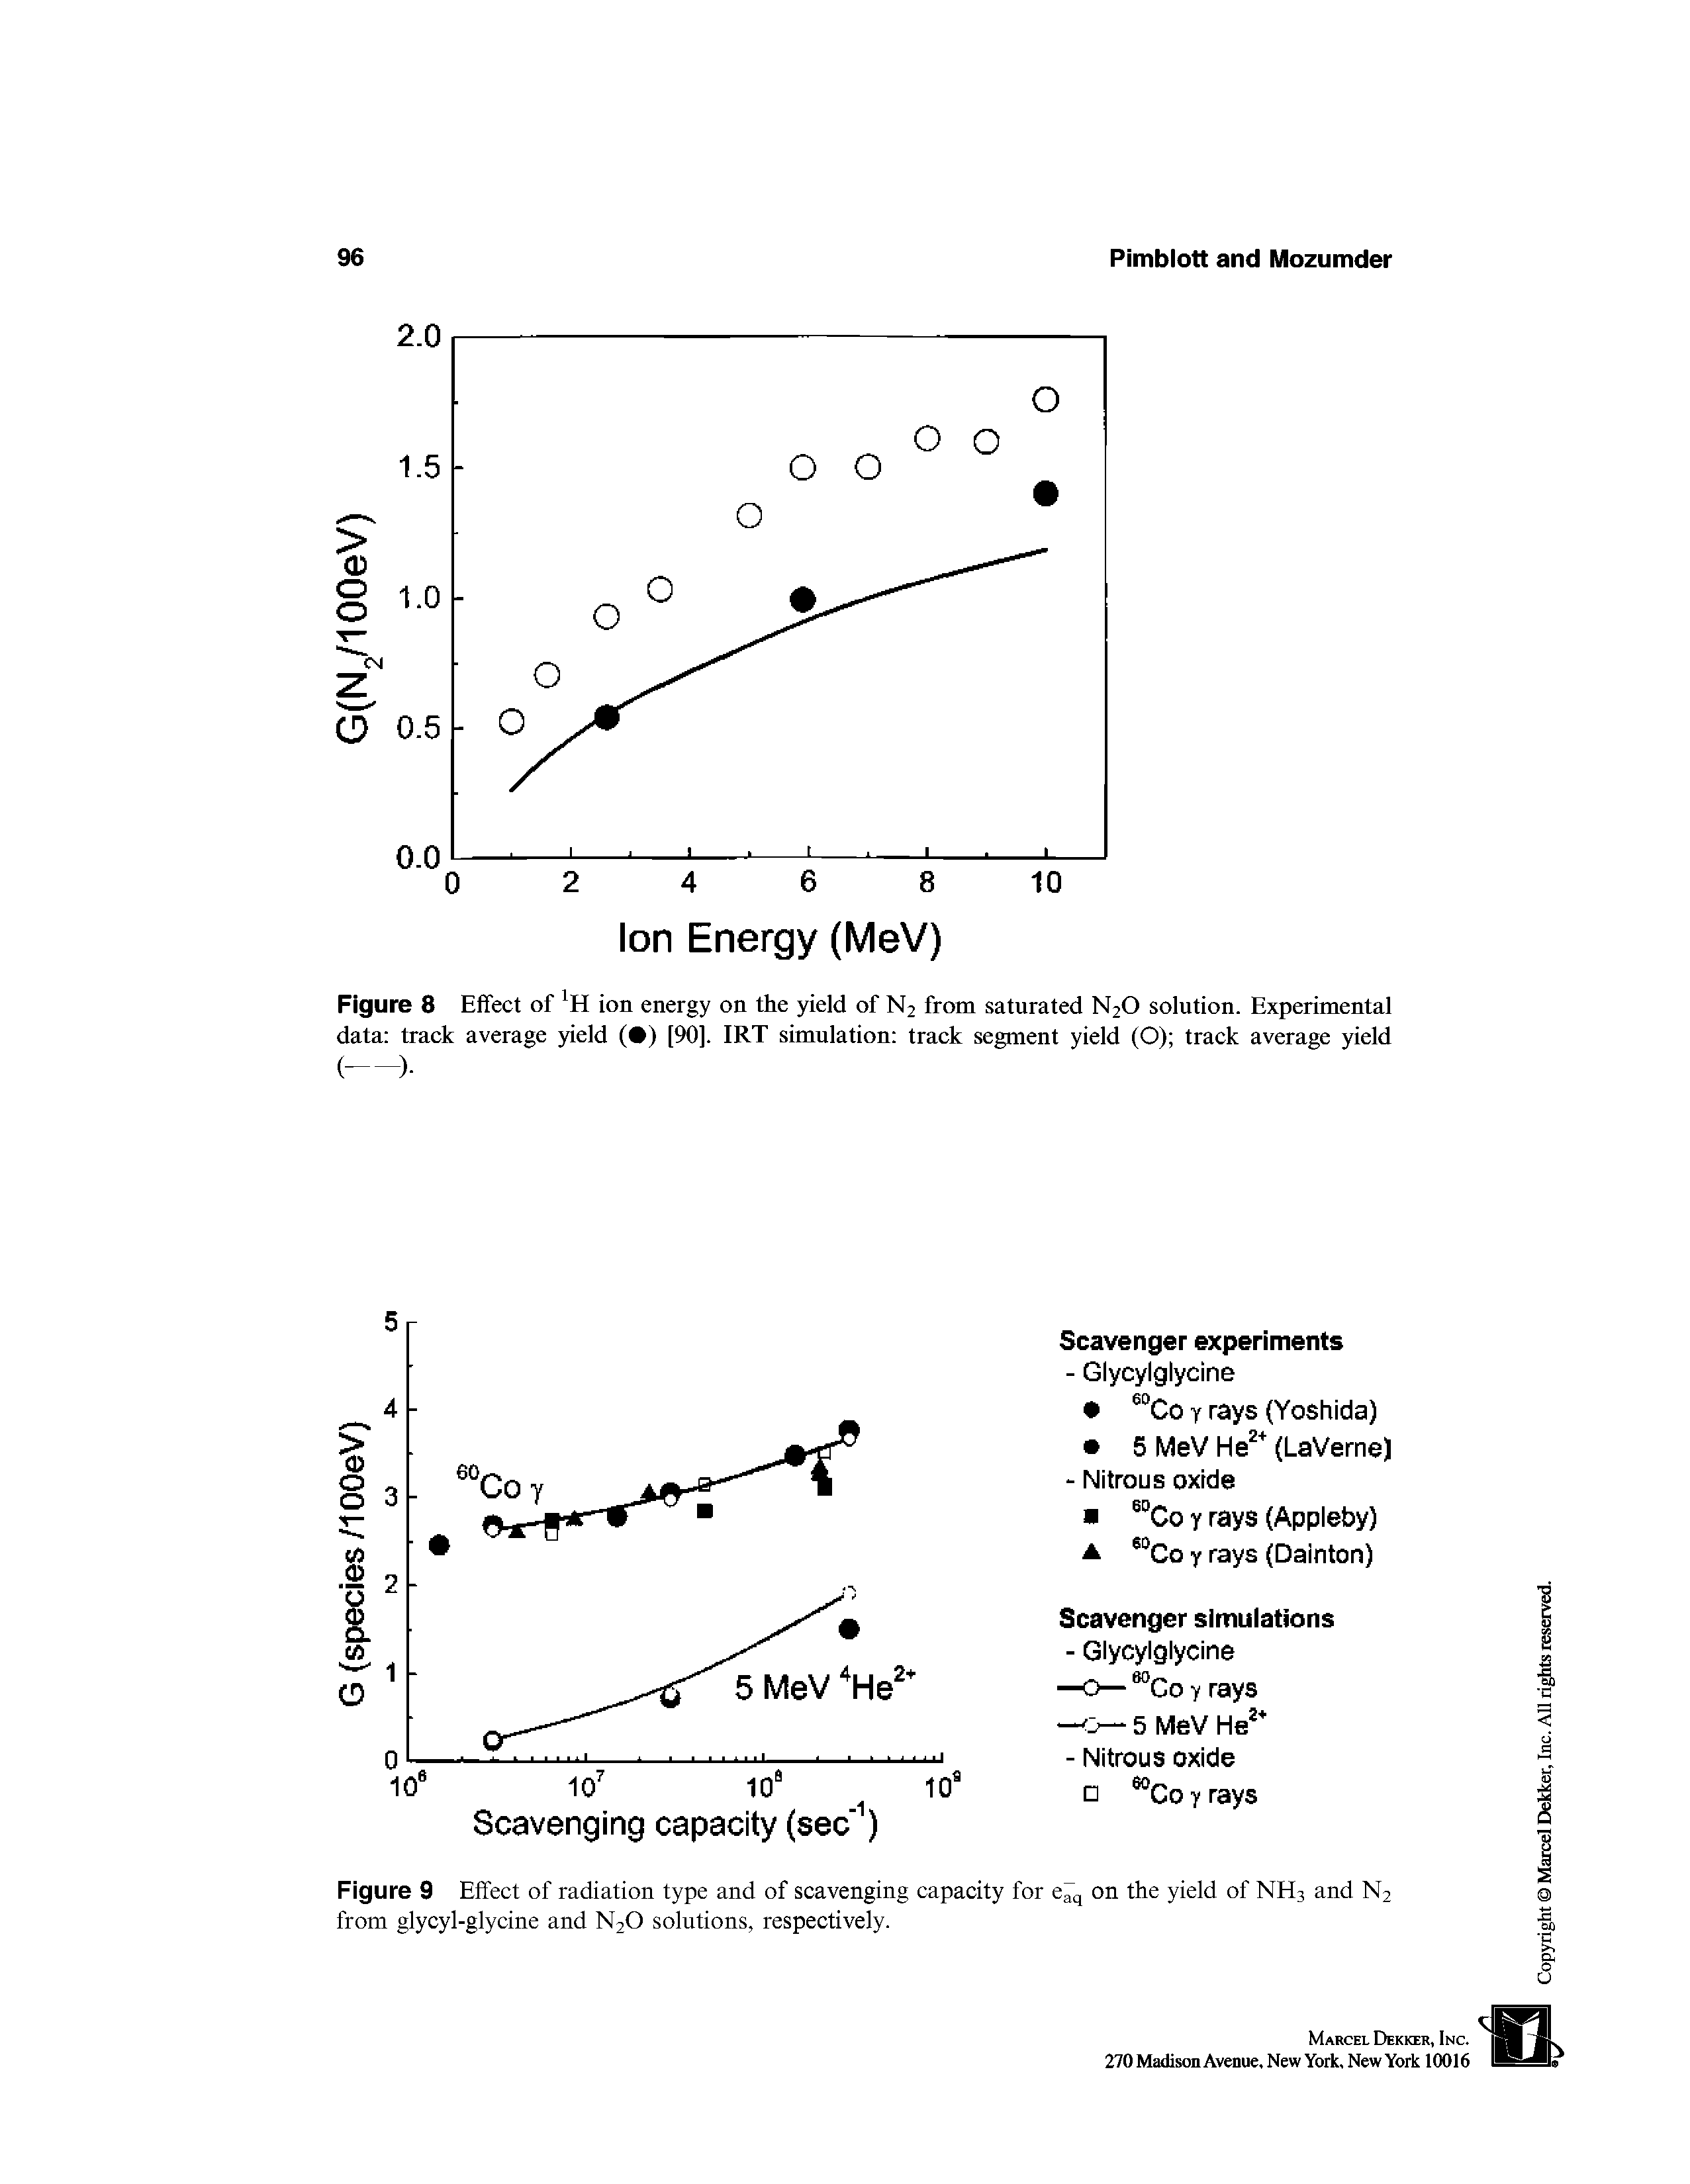 Figure 9 Effect of radiation type and of scavenging capacity for Caq on the yield of NH3 and N2 from glycyl-glycine and N2O solutions, respectively.